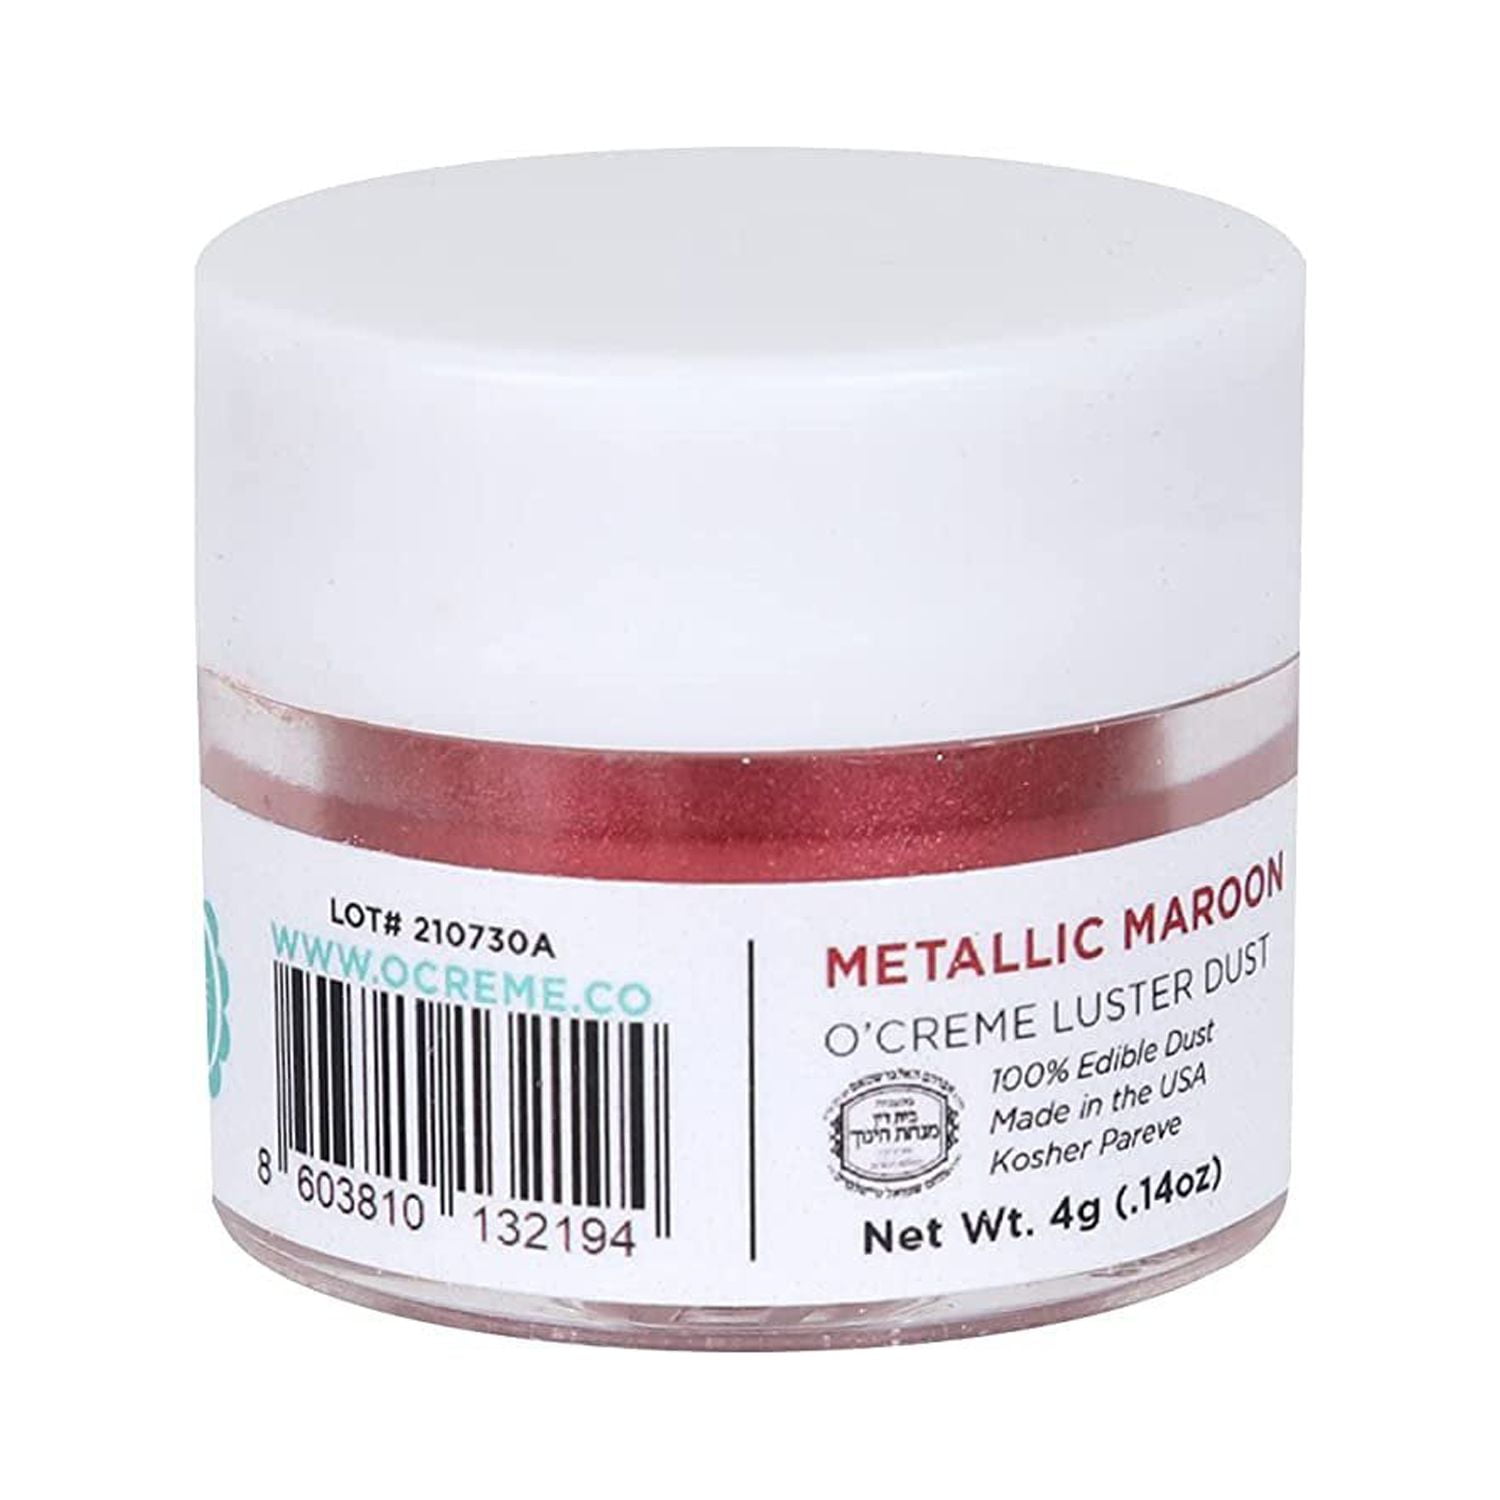 Metallic Maroon Red Edible Luster Dust by NY Cake - 4 grams